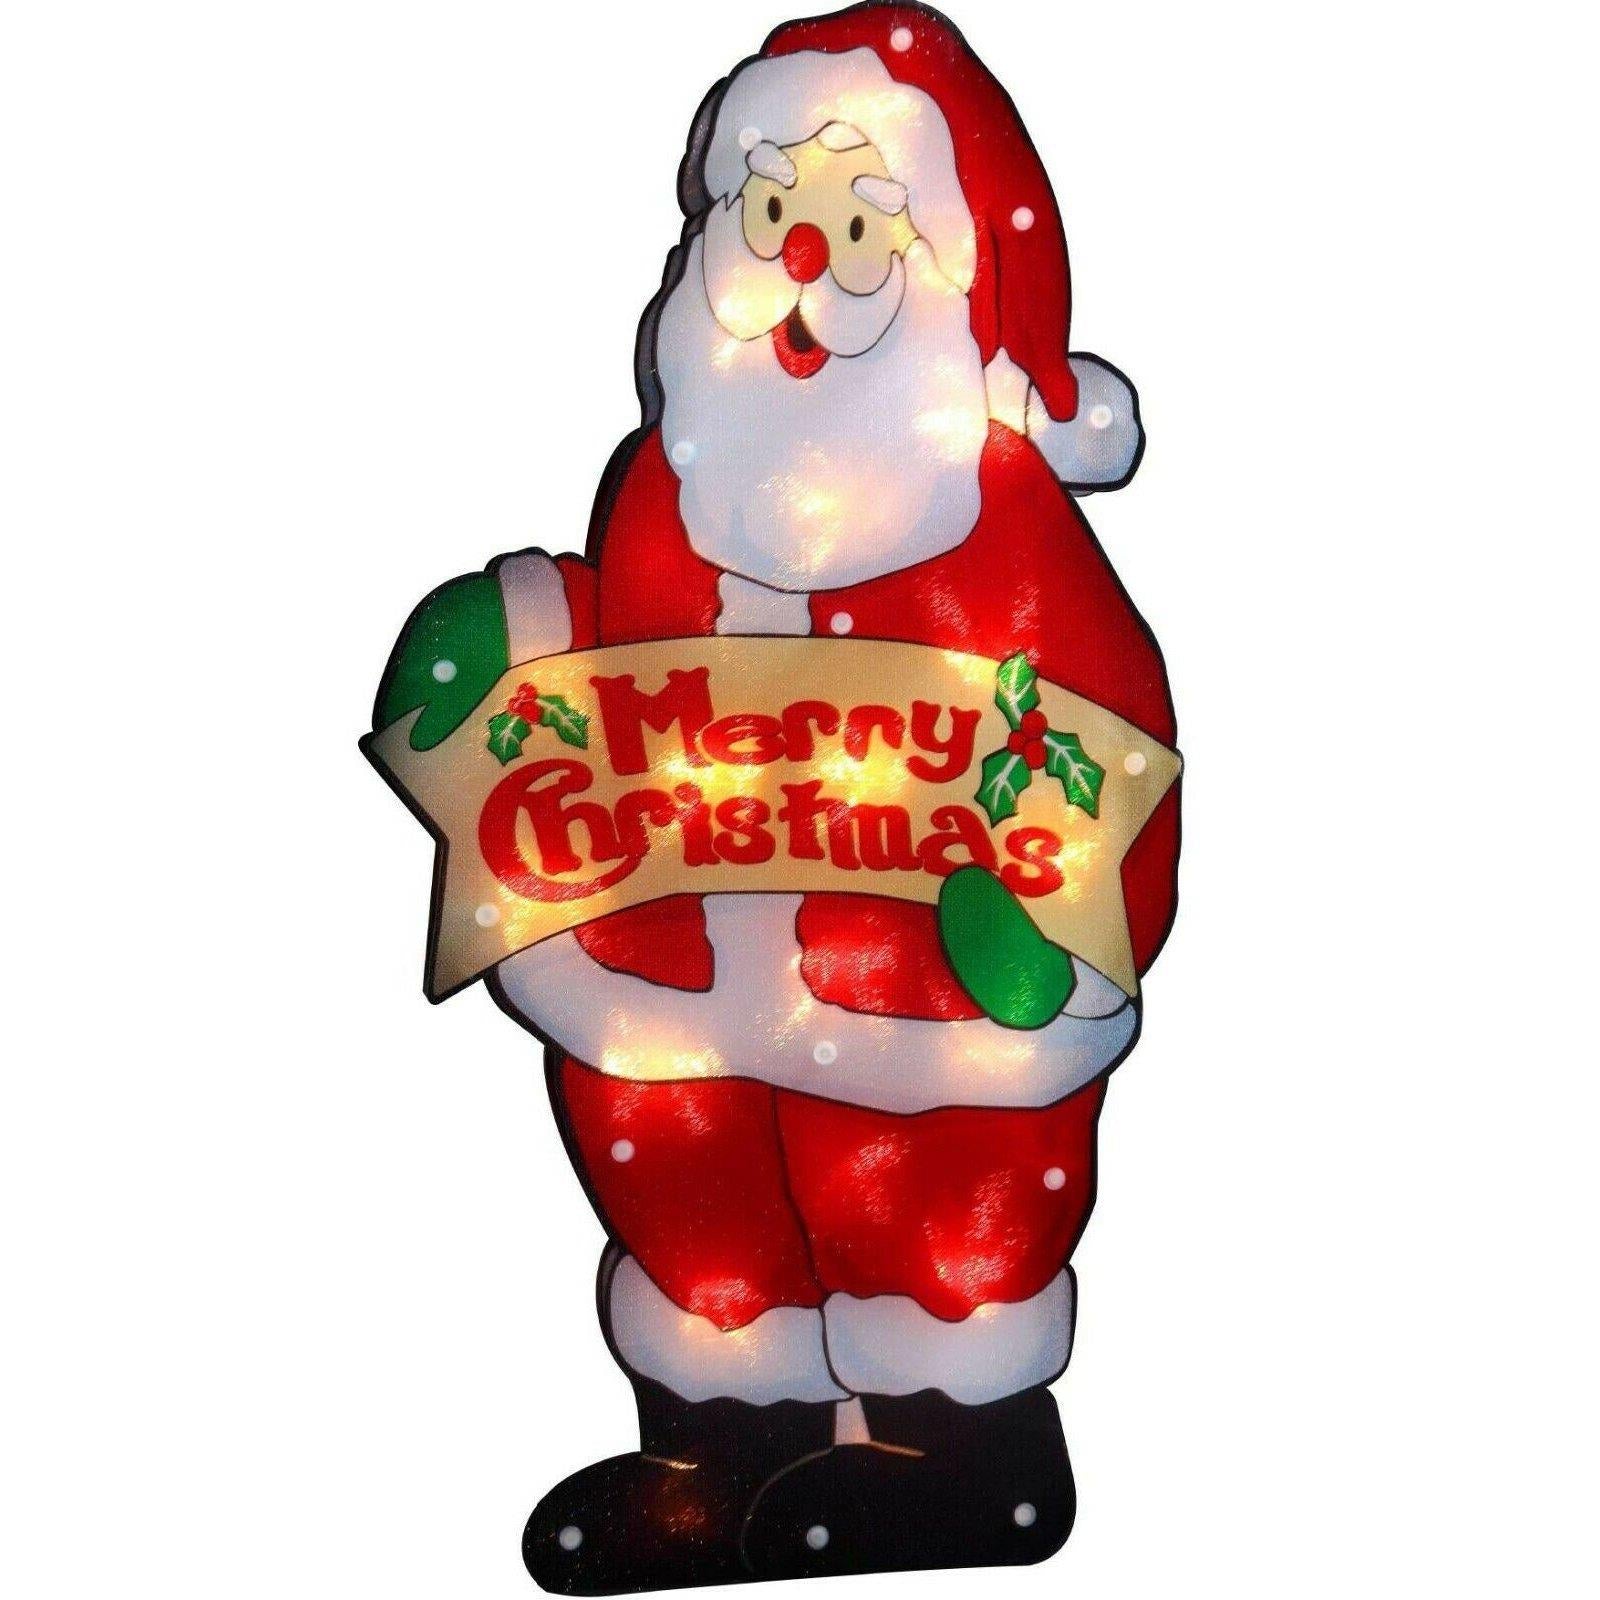 Santa Merry Xmas Sign Christmas LED Light Silhouette by The Magic Toy Shop - UKBuyZone